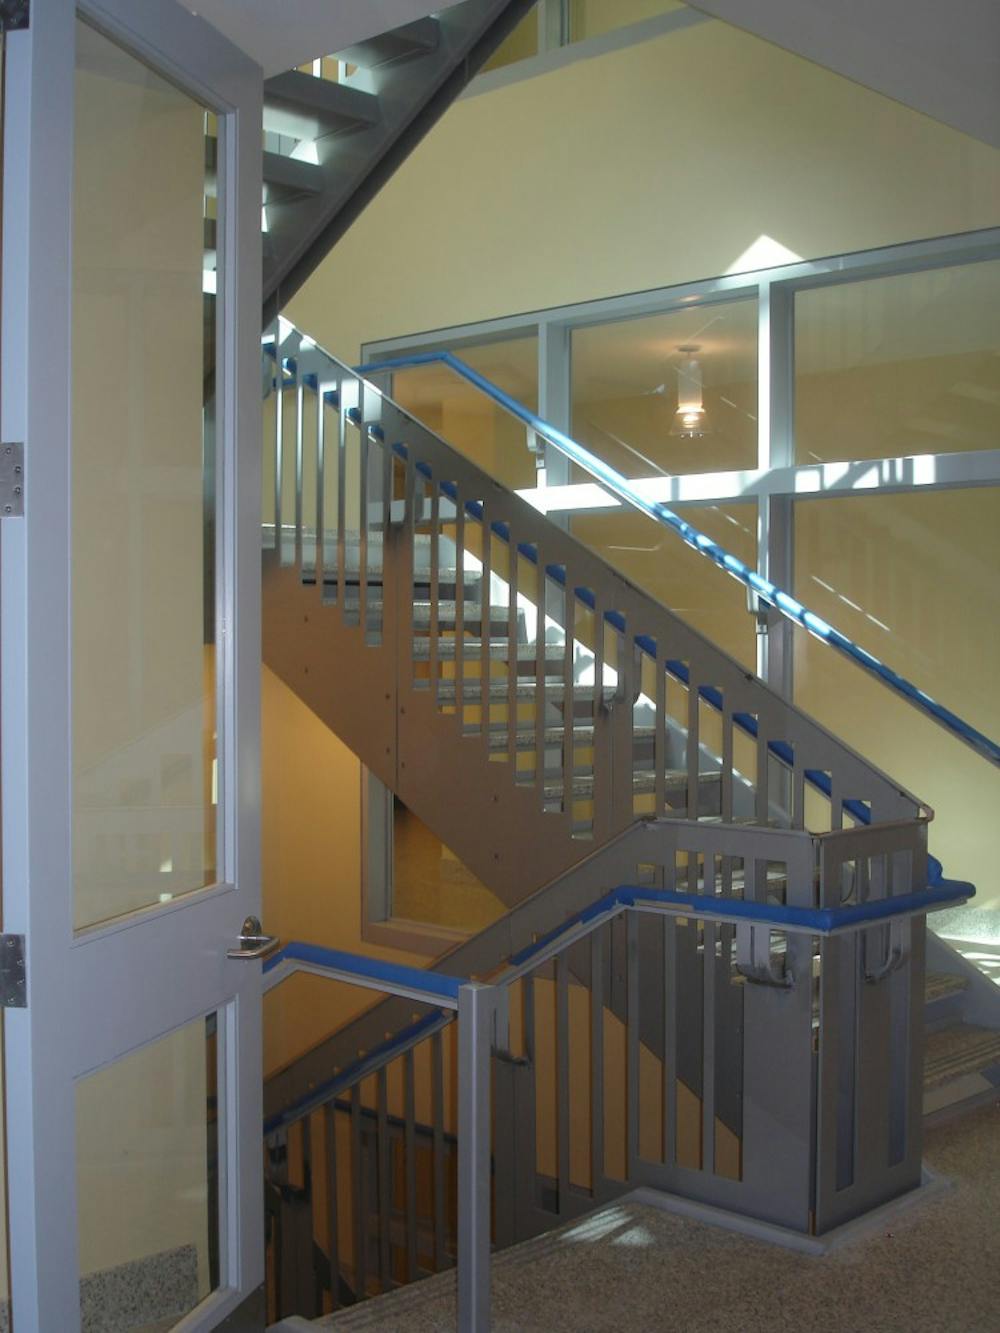 The number of stairways has been reduced from 8 to 3. Elevators will ensure handicapped accessibility.